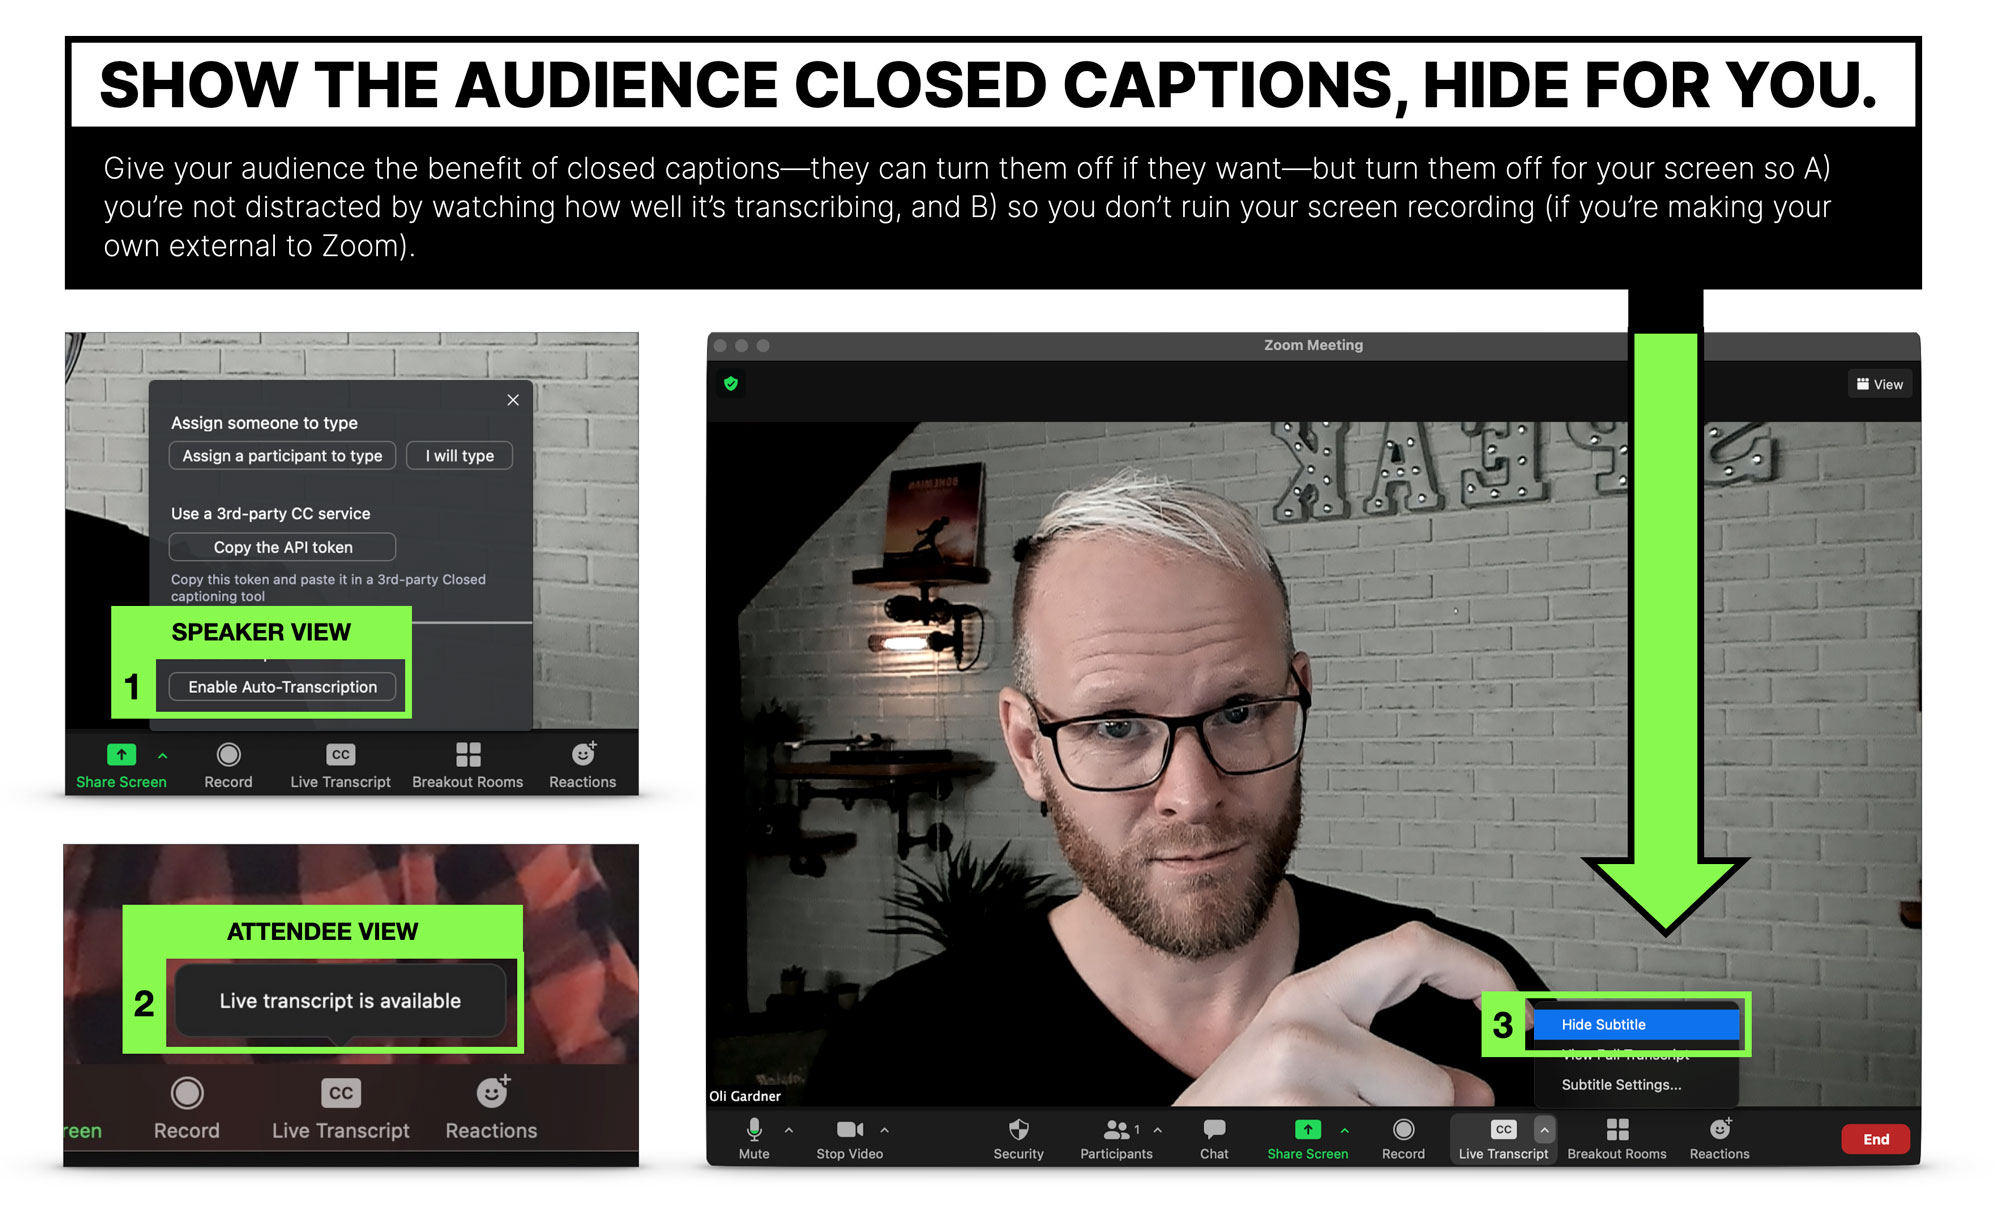 Turn on Zoom closed captions for you - and turn off for the audience